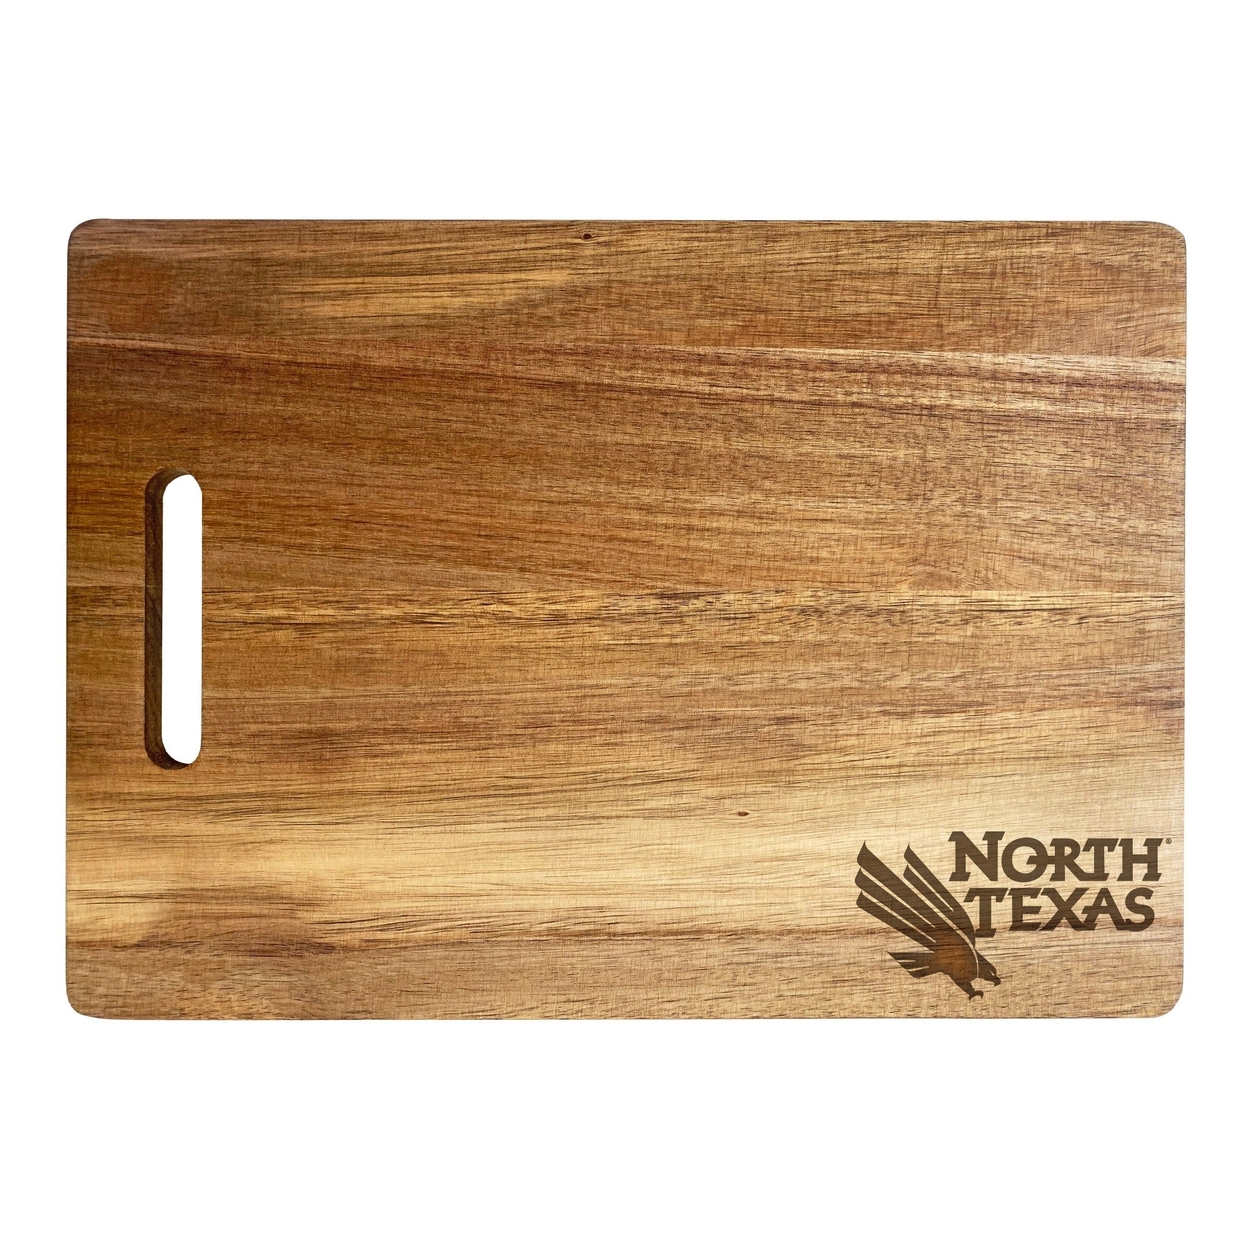 North Texas Engraved Wooden Cutting Board 10 X 14 Acacia Wood - Small Engraving